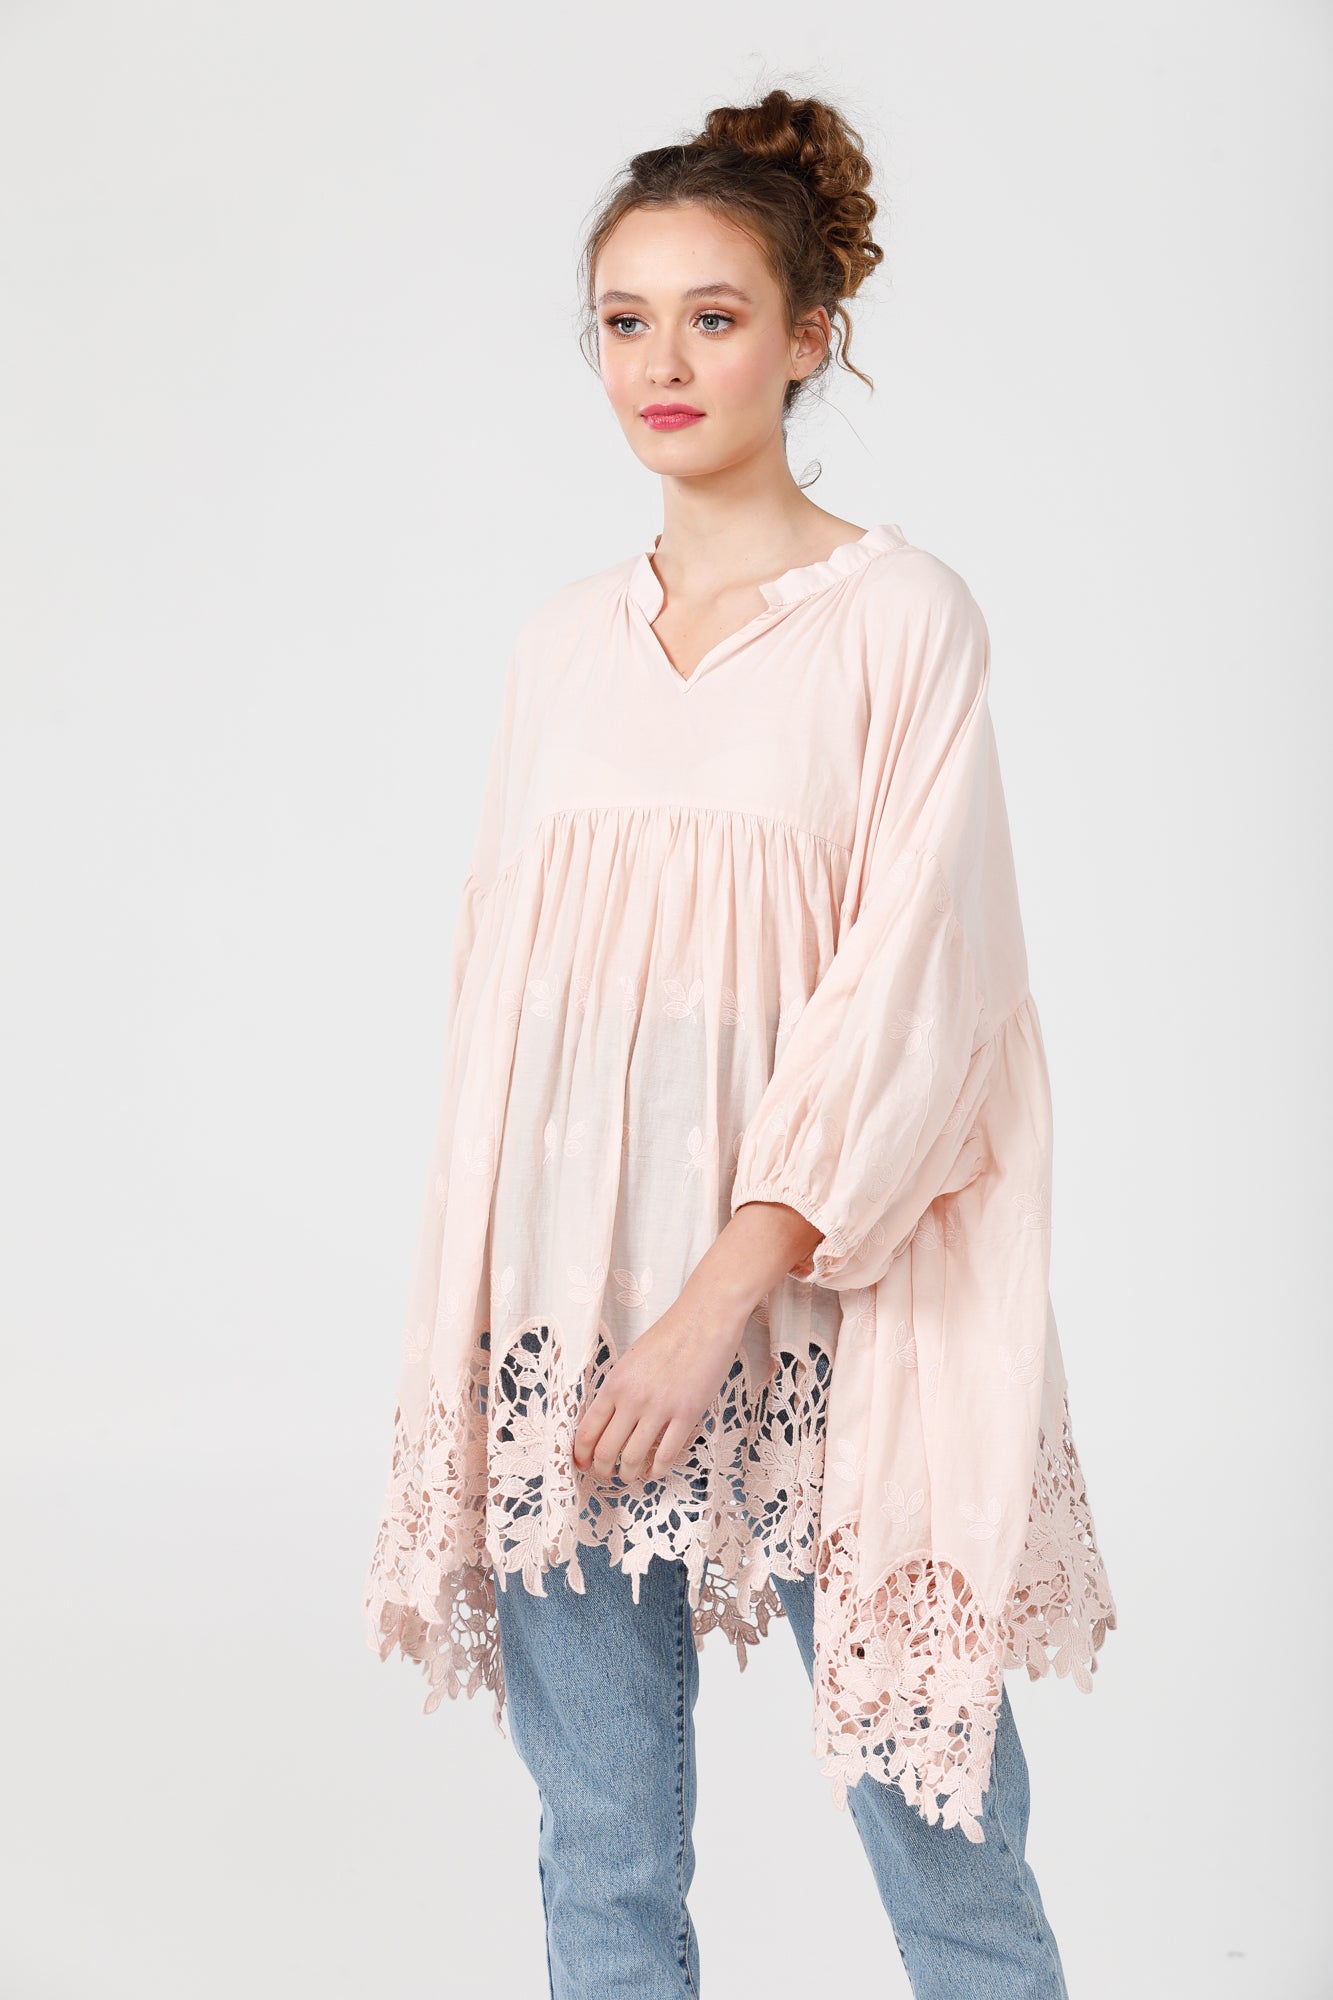 French cotton smock. pink scalloped lace.